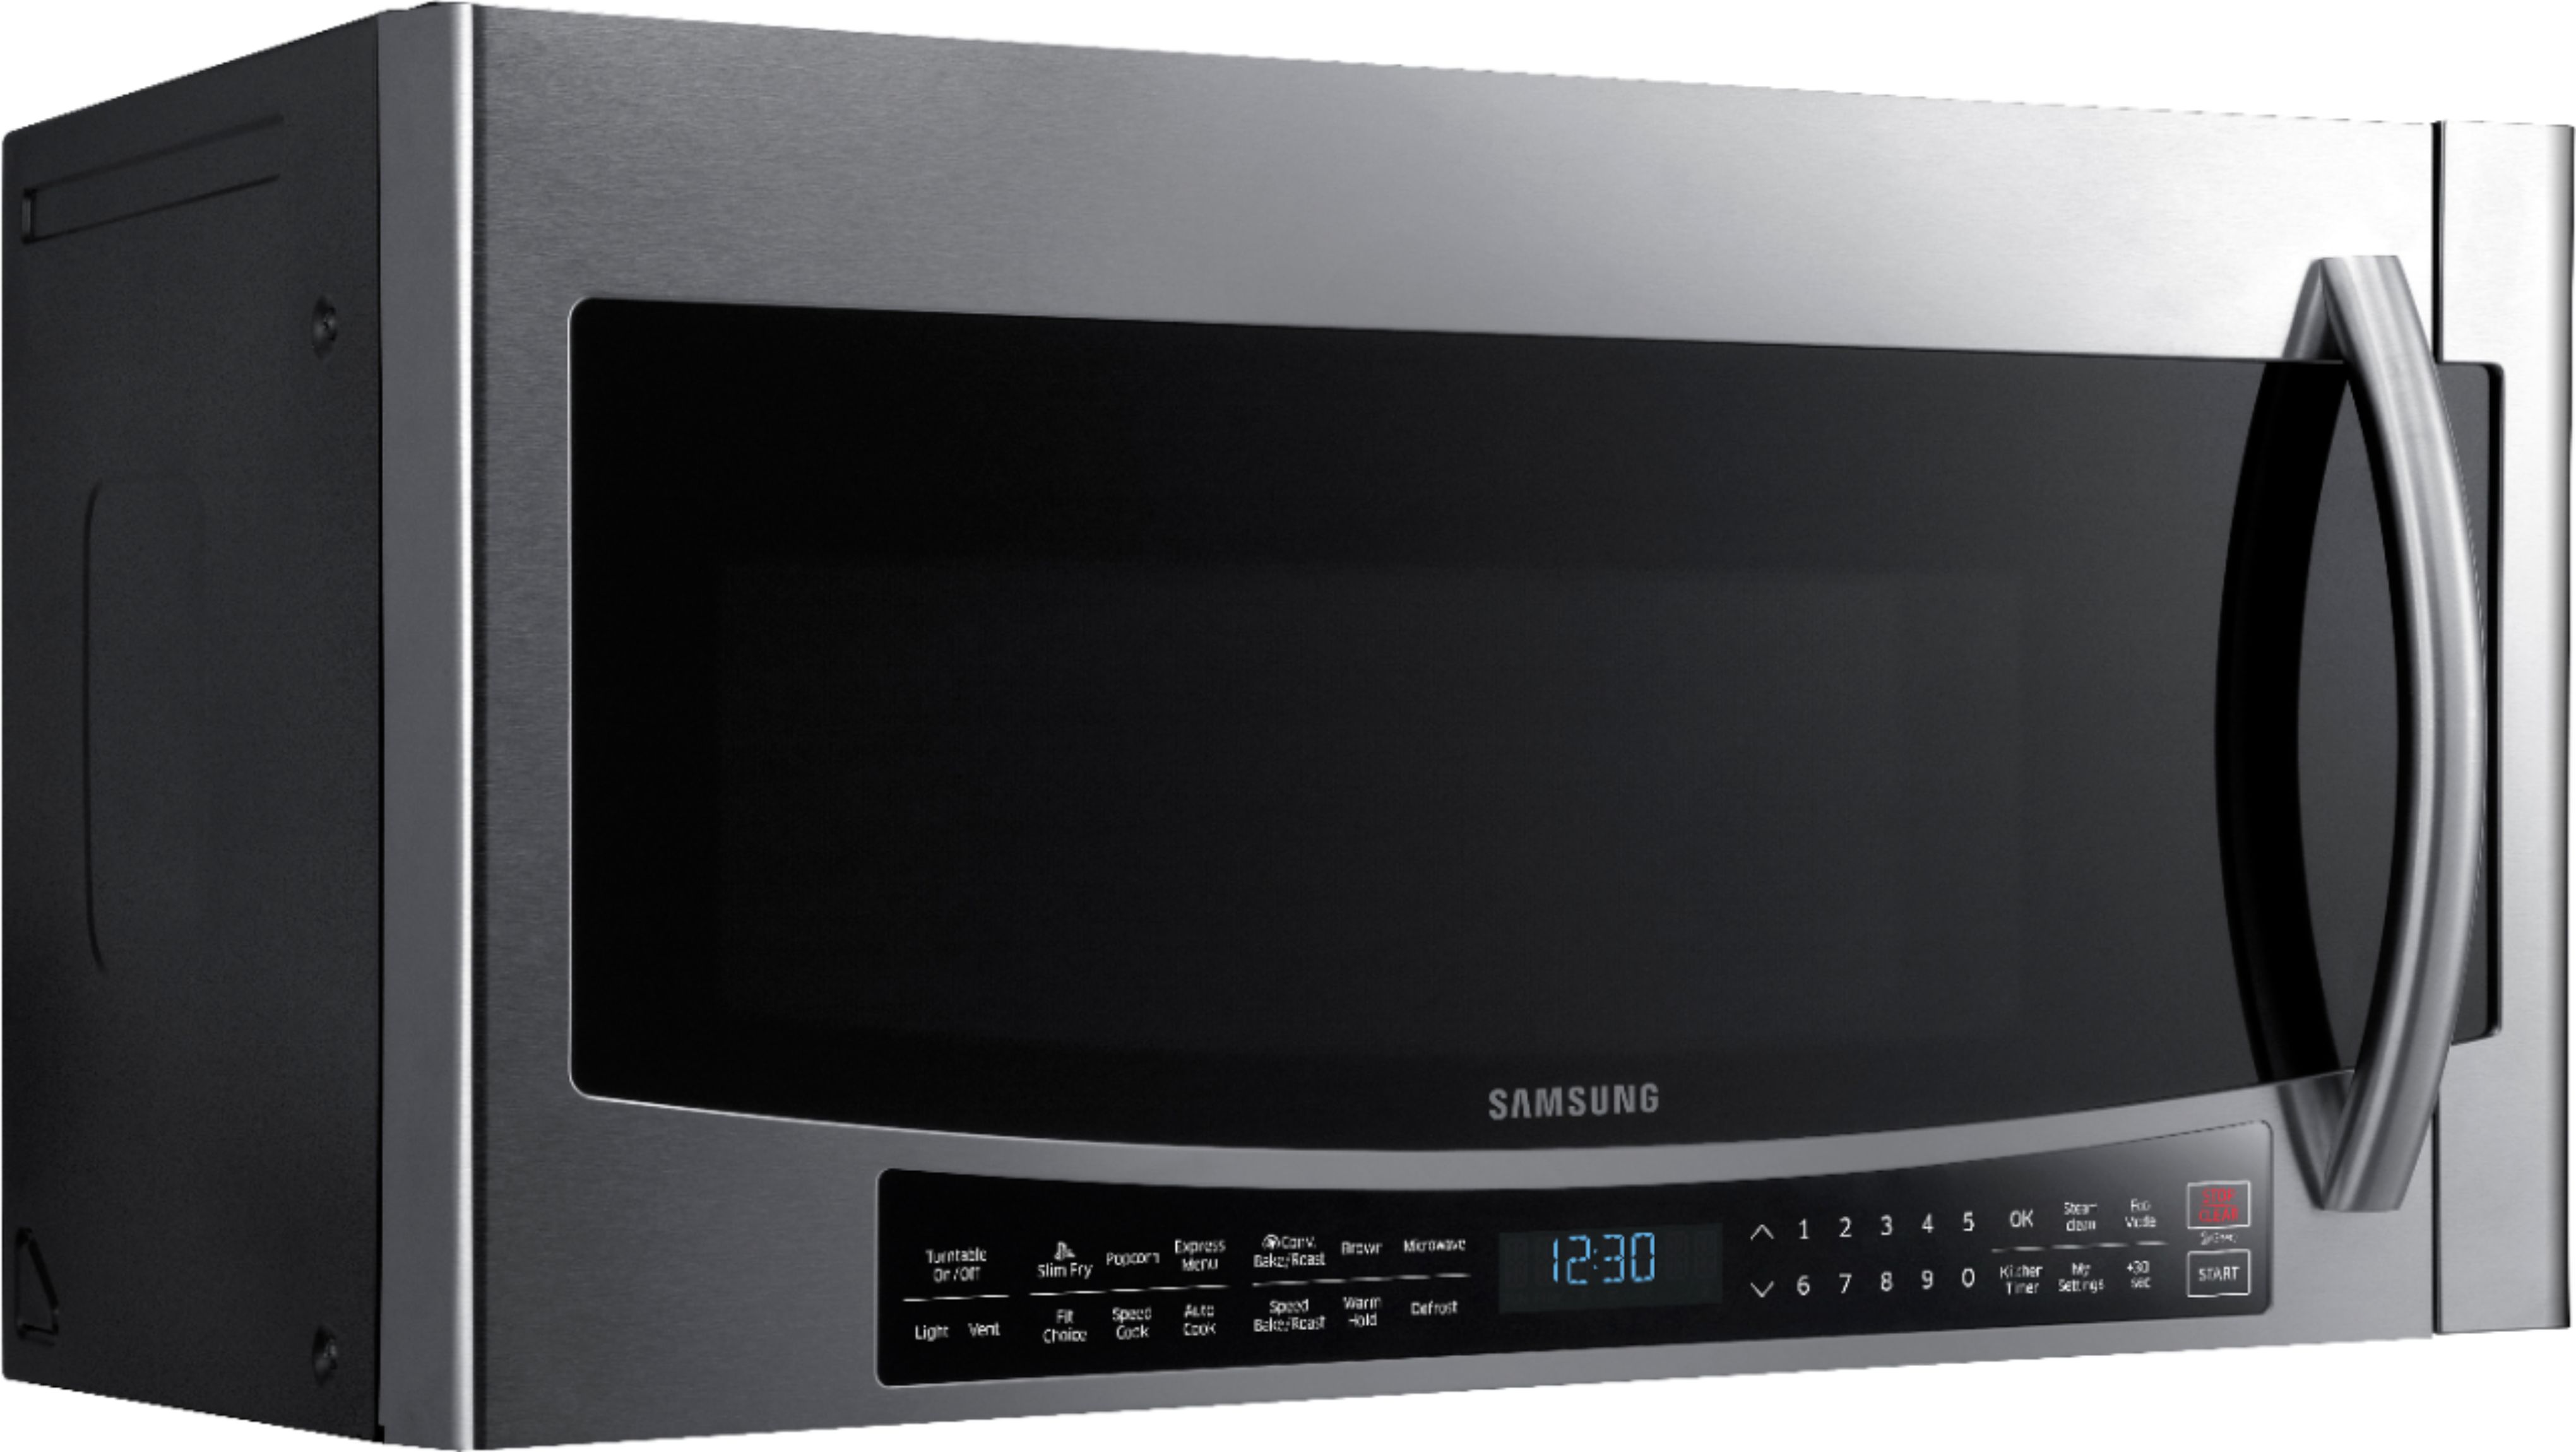 Angle View: Samsung - 1.7 Cu. Ft. Convection  Over-the-Range Fingerprint Resistant  Microwave -Stainless Steel - Stainless steel